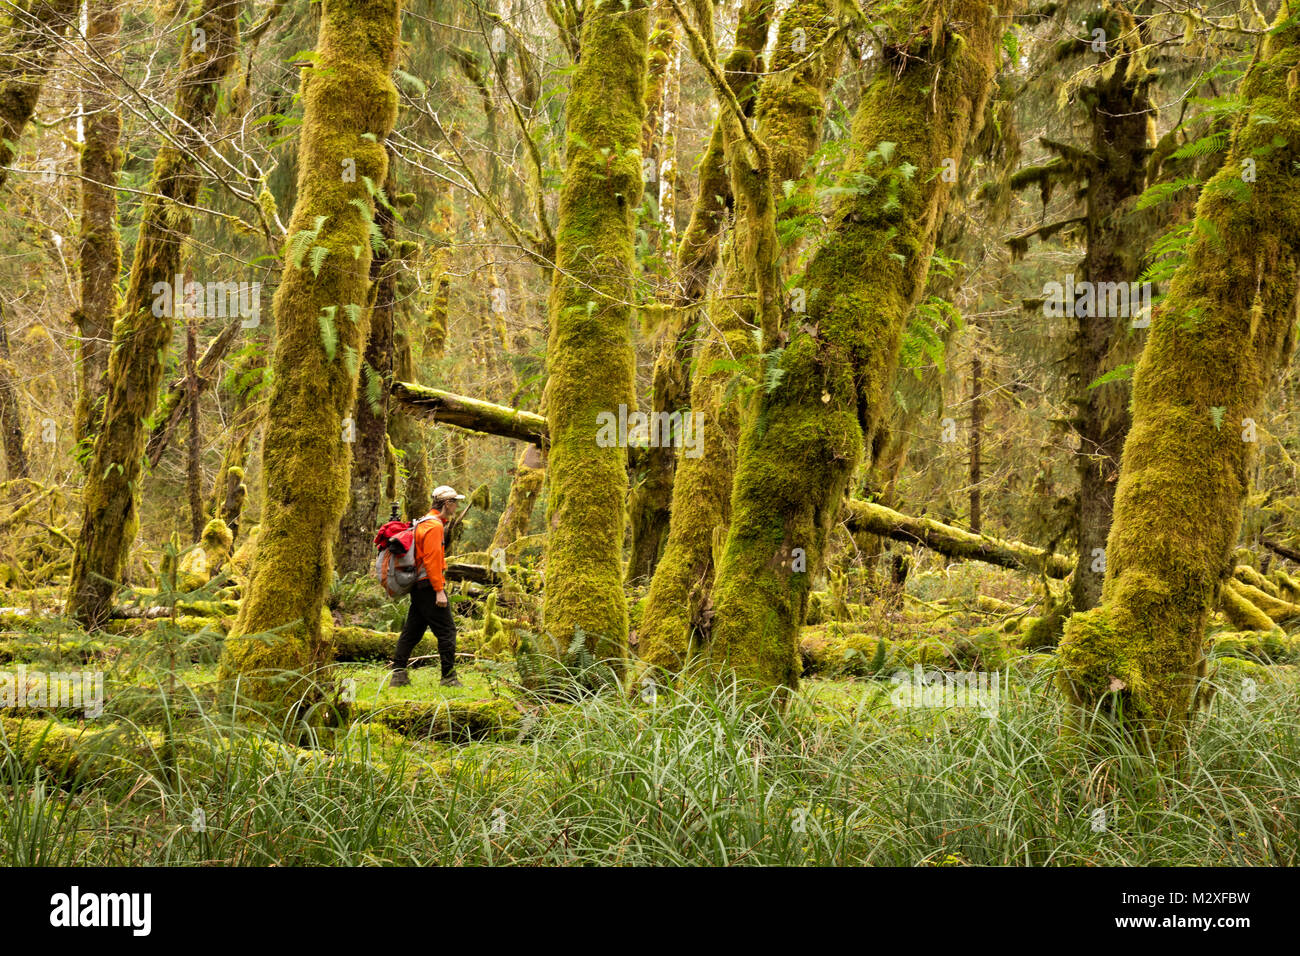 WA13288-00...WASHINGTON - Hiker walking through a forest of moss covered Big Leaf Maple trees along Sams River Trail in the Queets Rain Forest of Olym Stock Photo